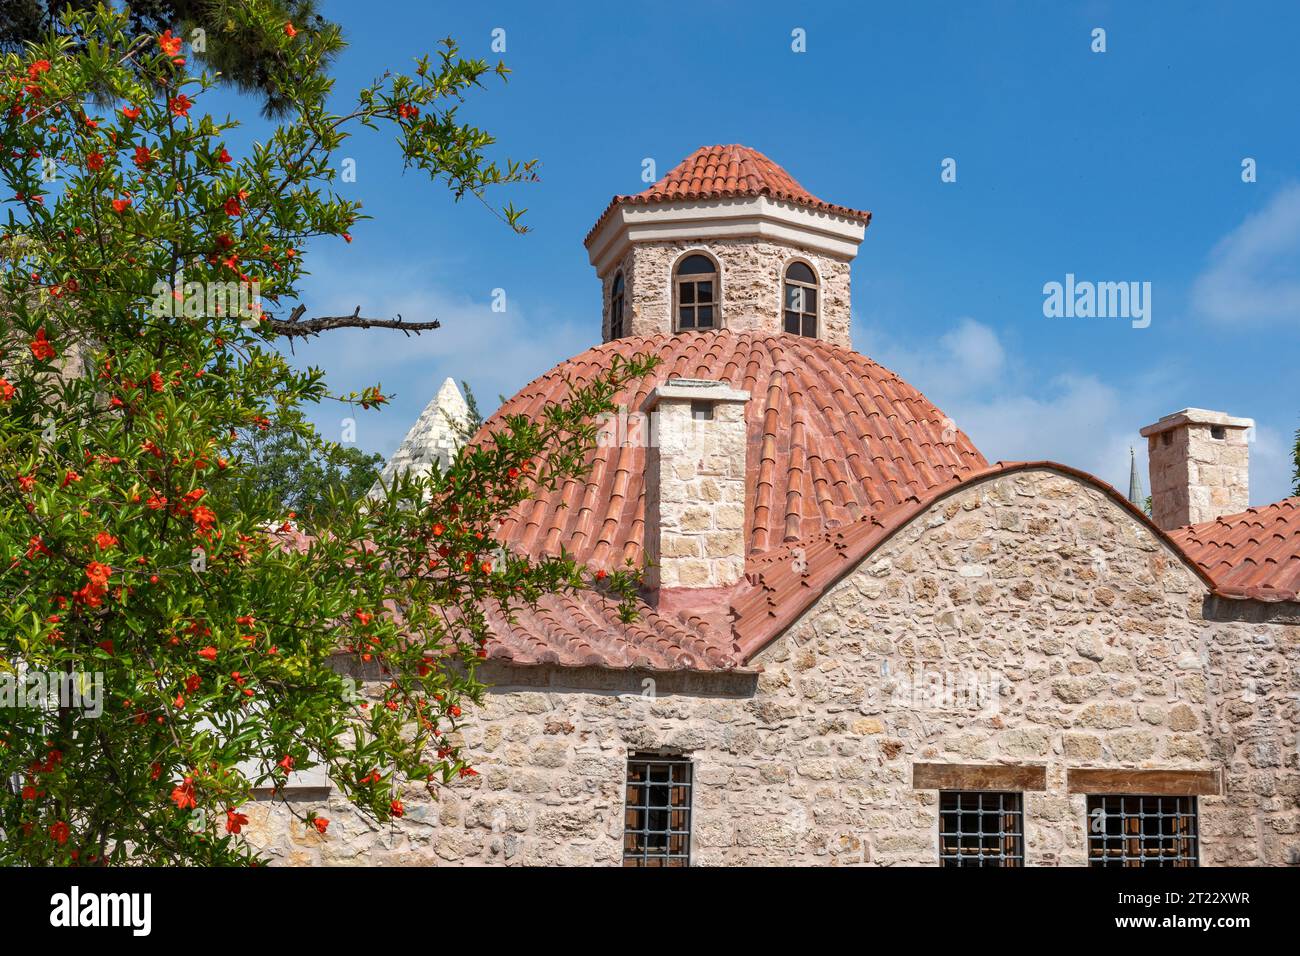 Exterior view of The Gallery of fine arts in Antalya,Turkey Stock Photo